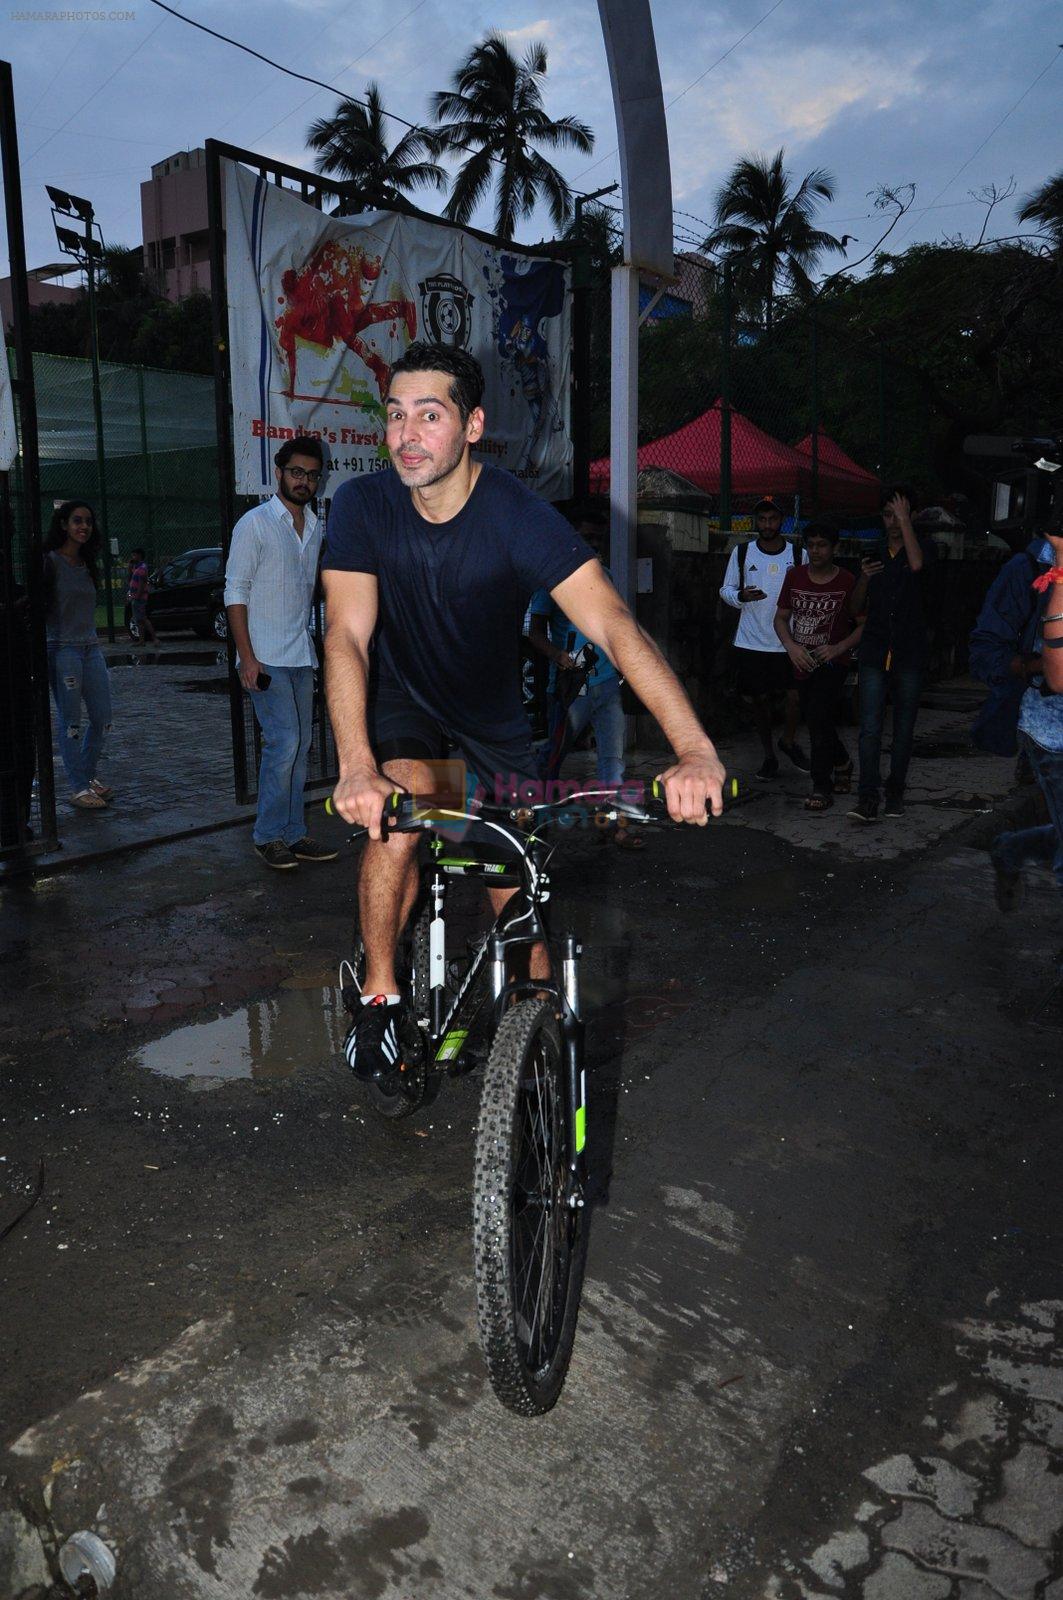 Dino Morea snapped at soccer match on 17th July 2016